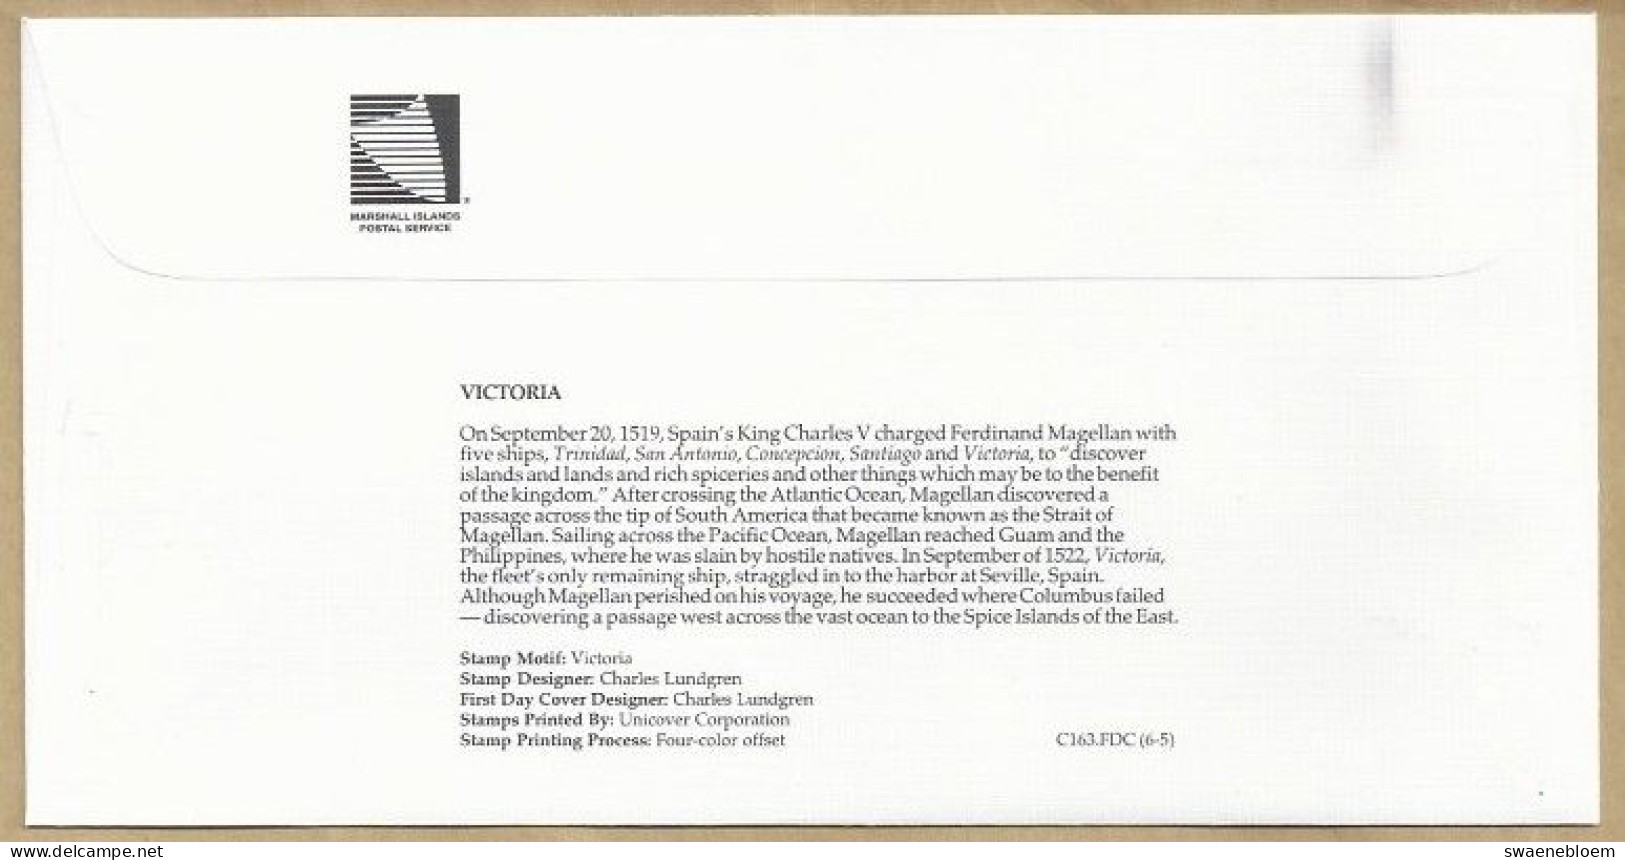 FDC. REPUBLIC OF THE MARSHALL ISLANDS. JUL 20 2000 MAJURO. VICTORIA. SHIPS OF DISCOVERY. C163.FDC. (6-5) - Marshall Islands